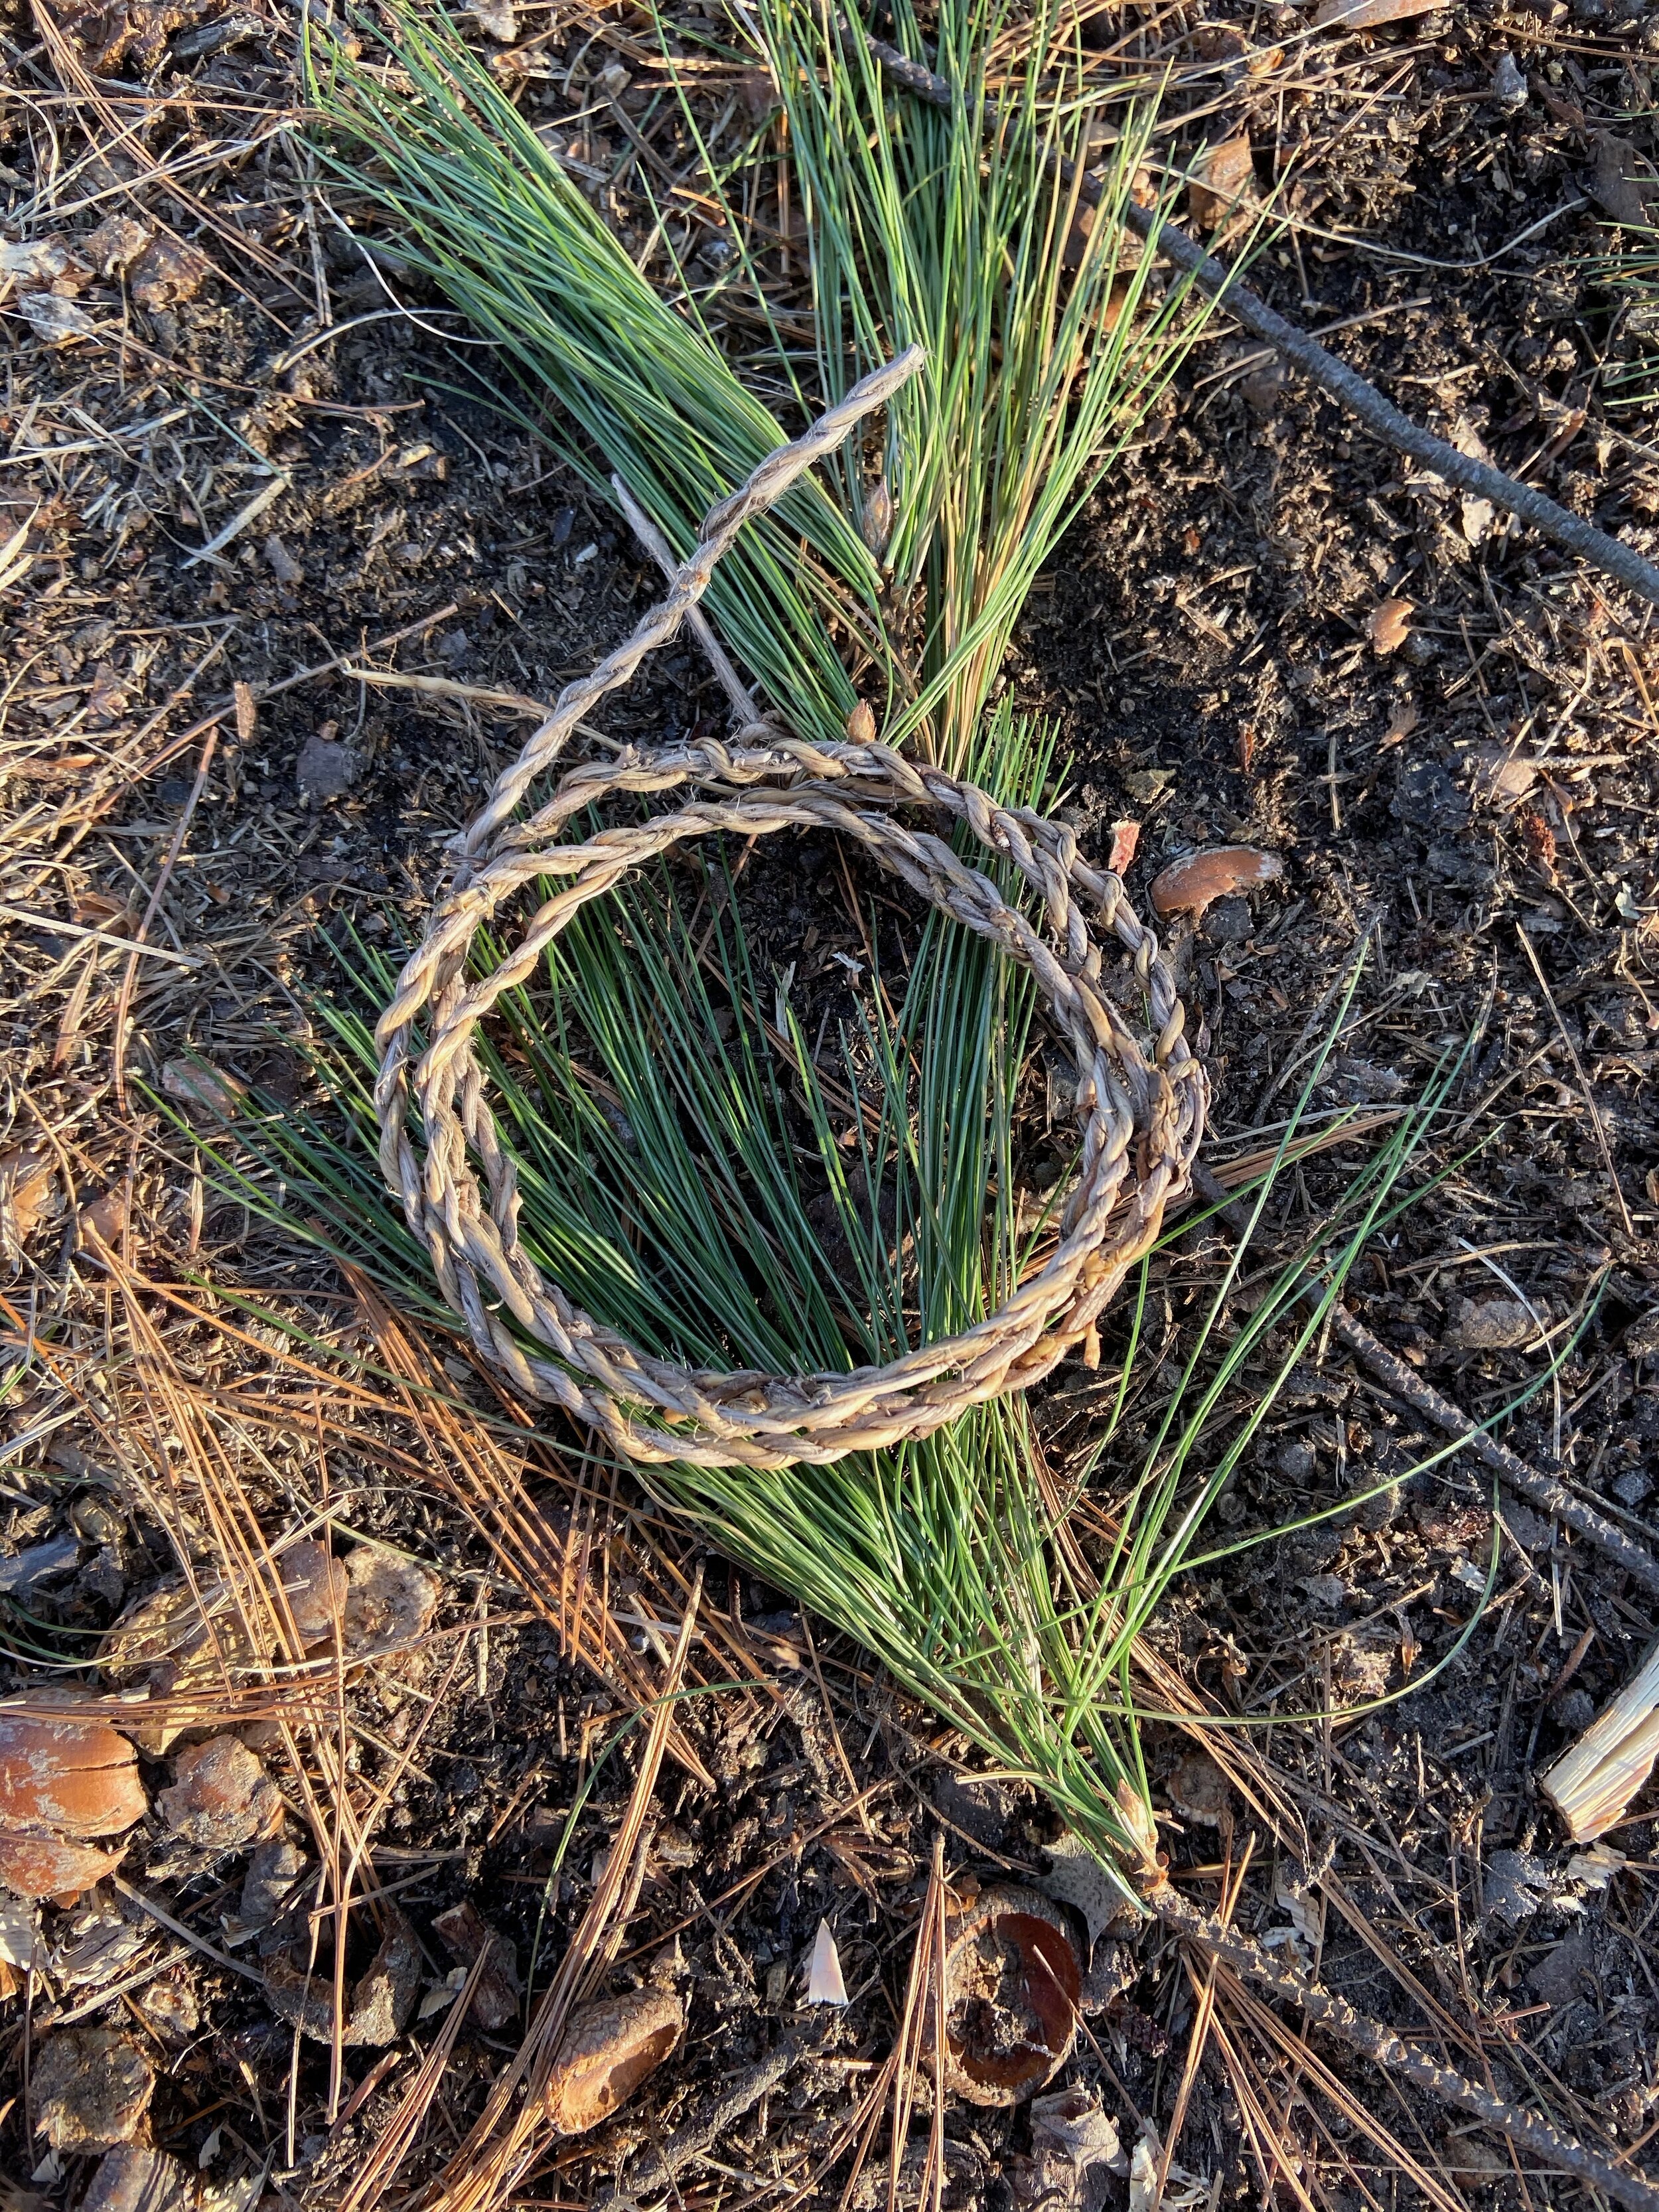 Cordage made from pine roots